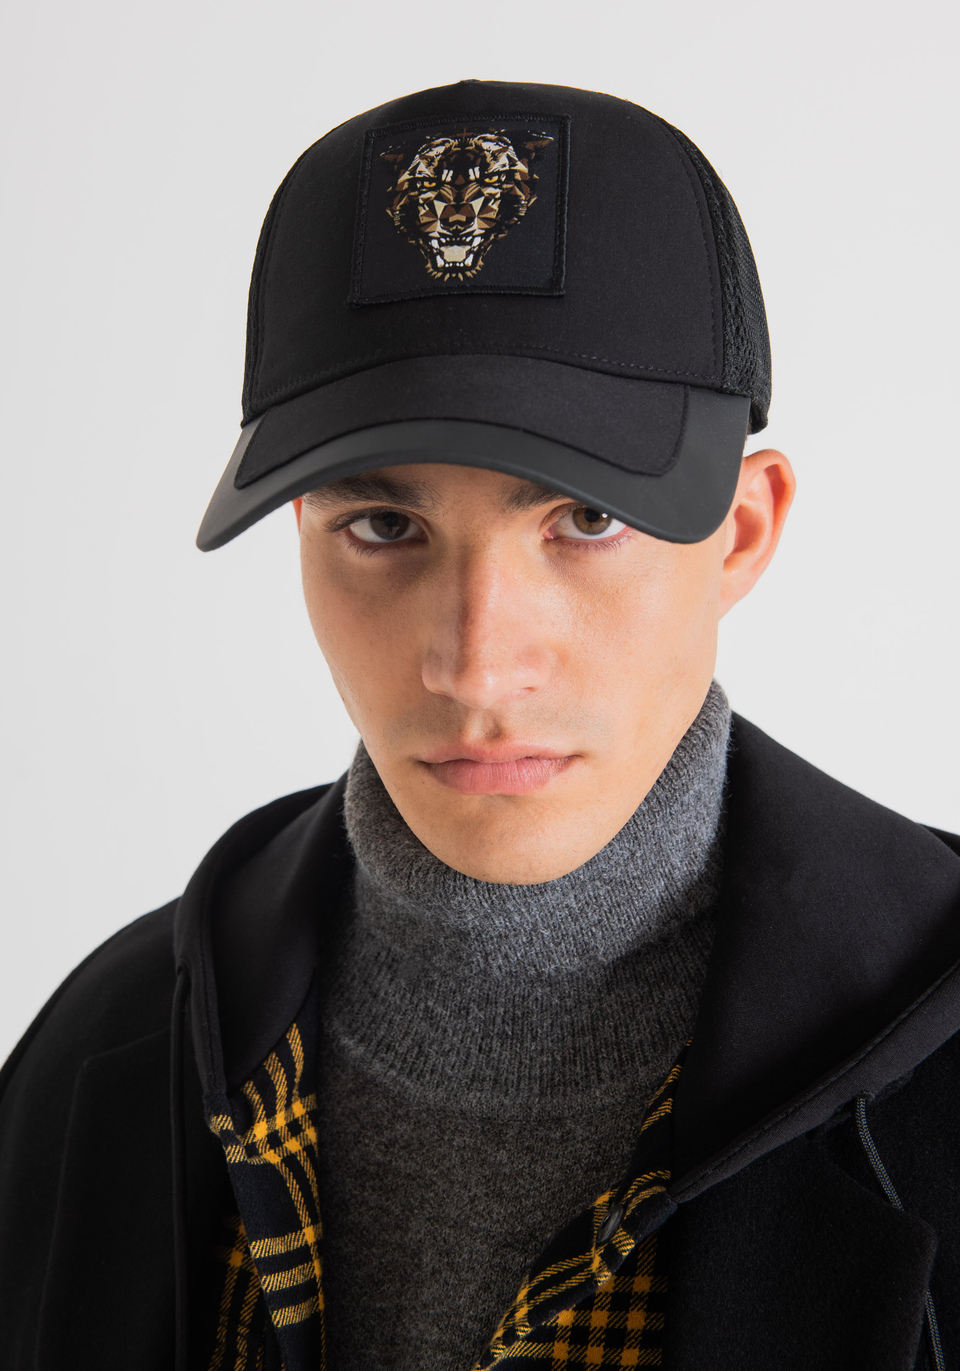 BASEBALL HAT WITH TIGER PATCH - Antony Morato Online Shop